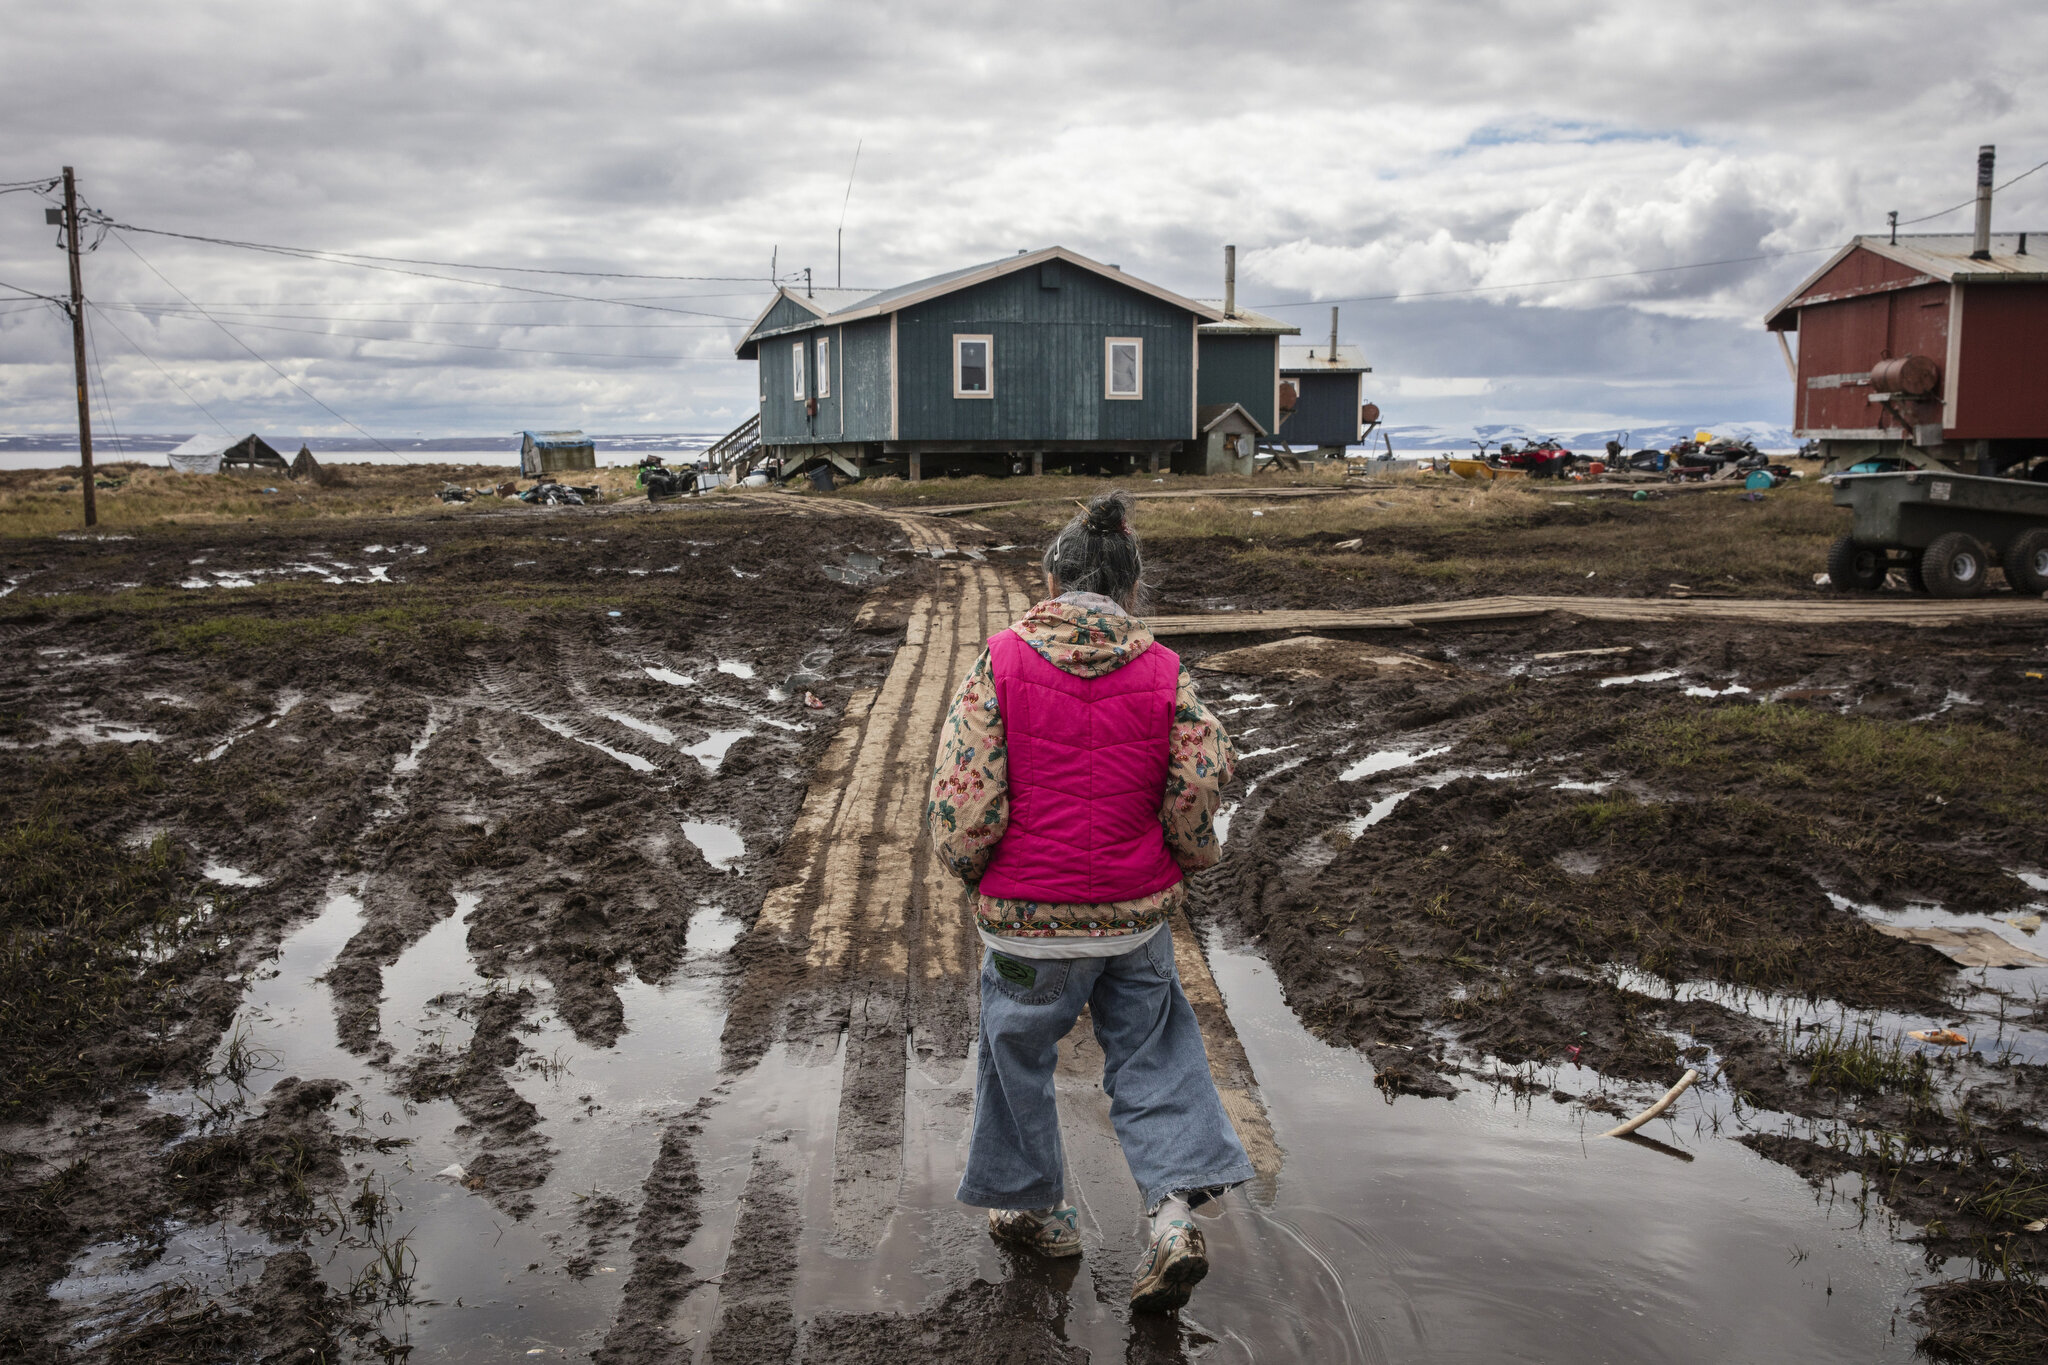  Monica Kasayuli walks across a flooded walkway on her way home in Newtok, Alaska. May 26th, 2019. Her home was deemed unsafe and she was packing at the time to move to temporary FEMA housing, before becoming one of Newtok's "pioneers." Currently Mon